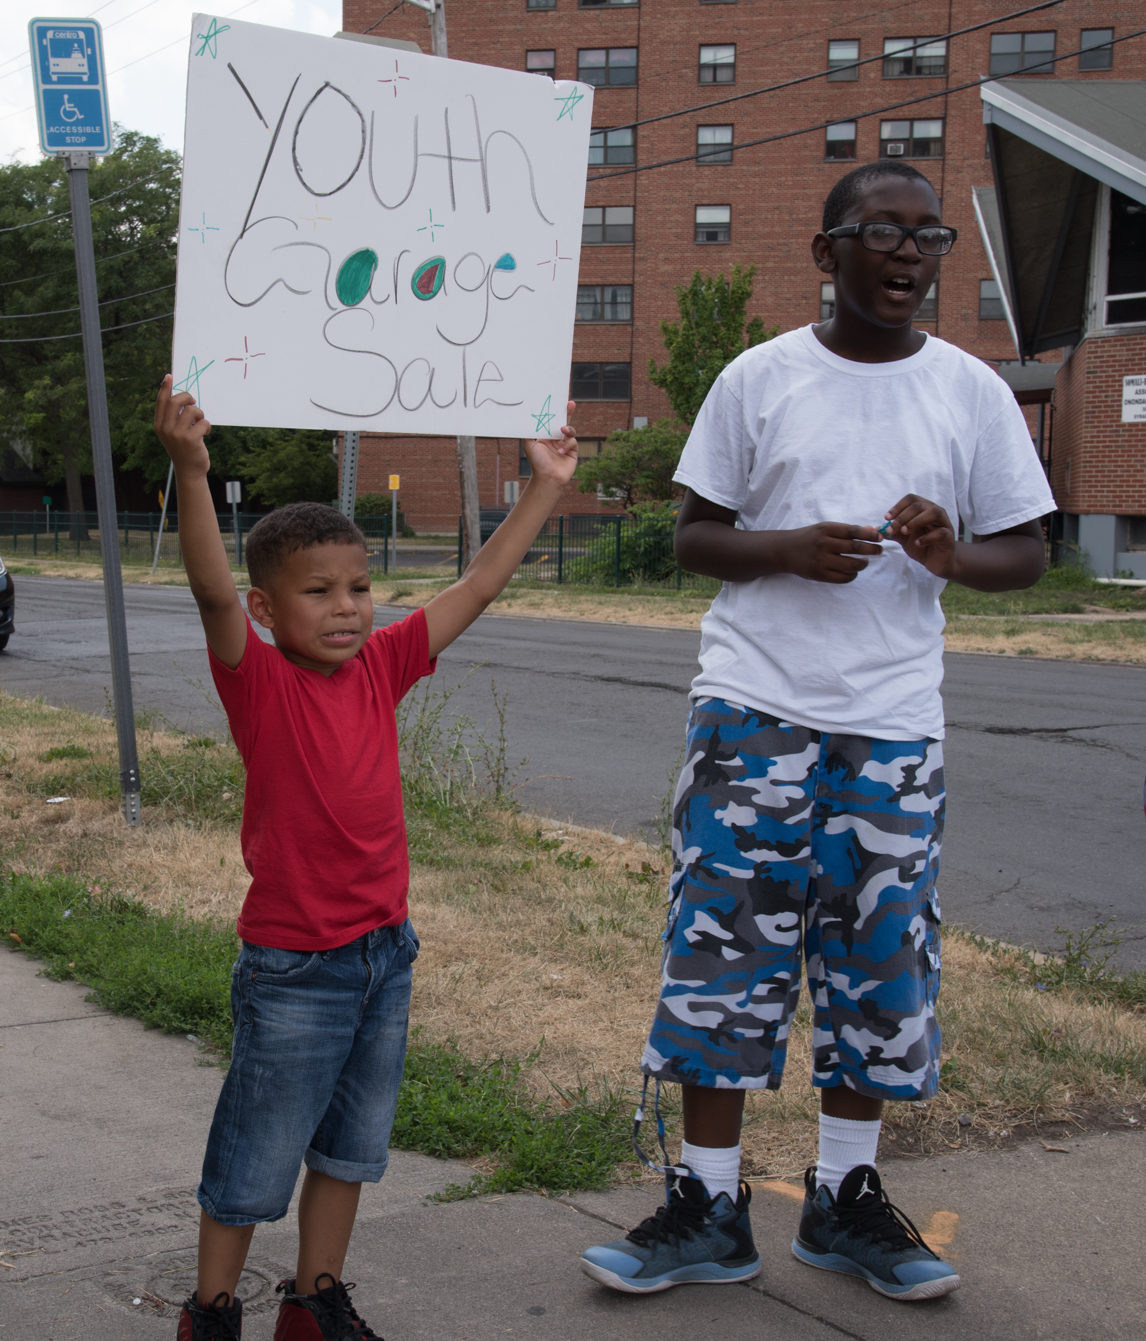 A young boy holds a sign promoting a fundraiser held at the Central Village Boys & Girls Club.